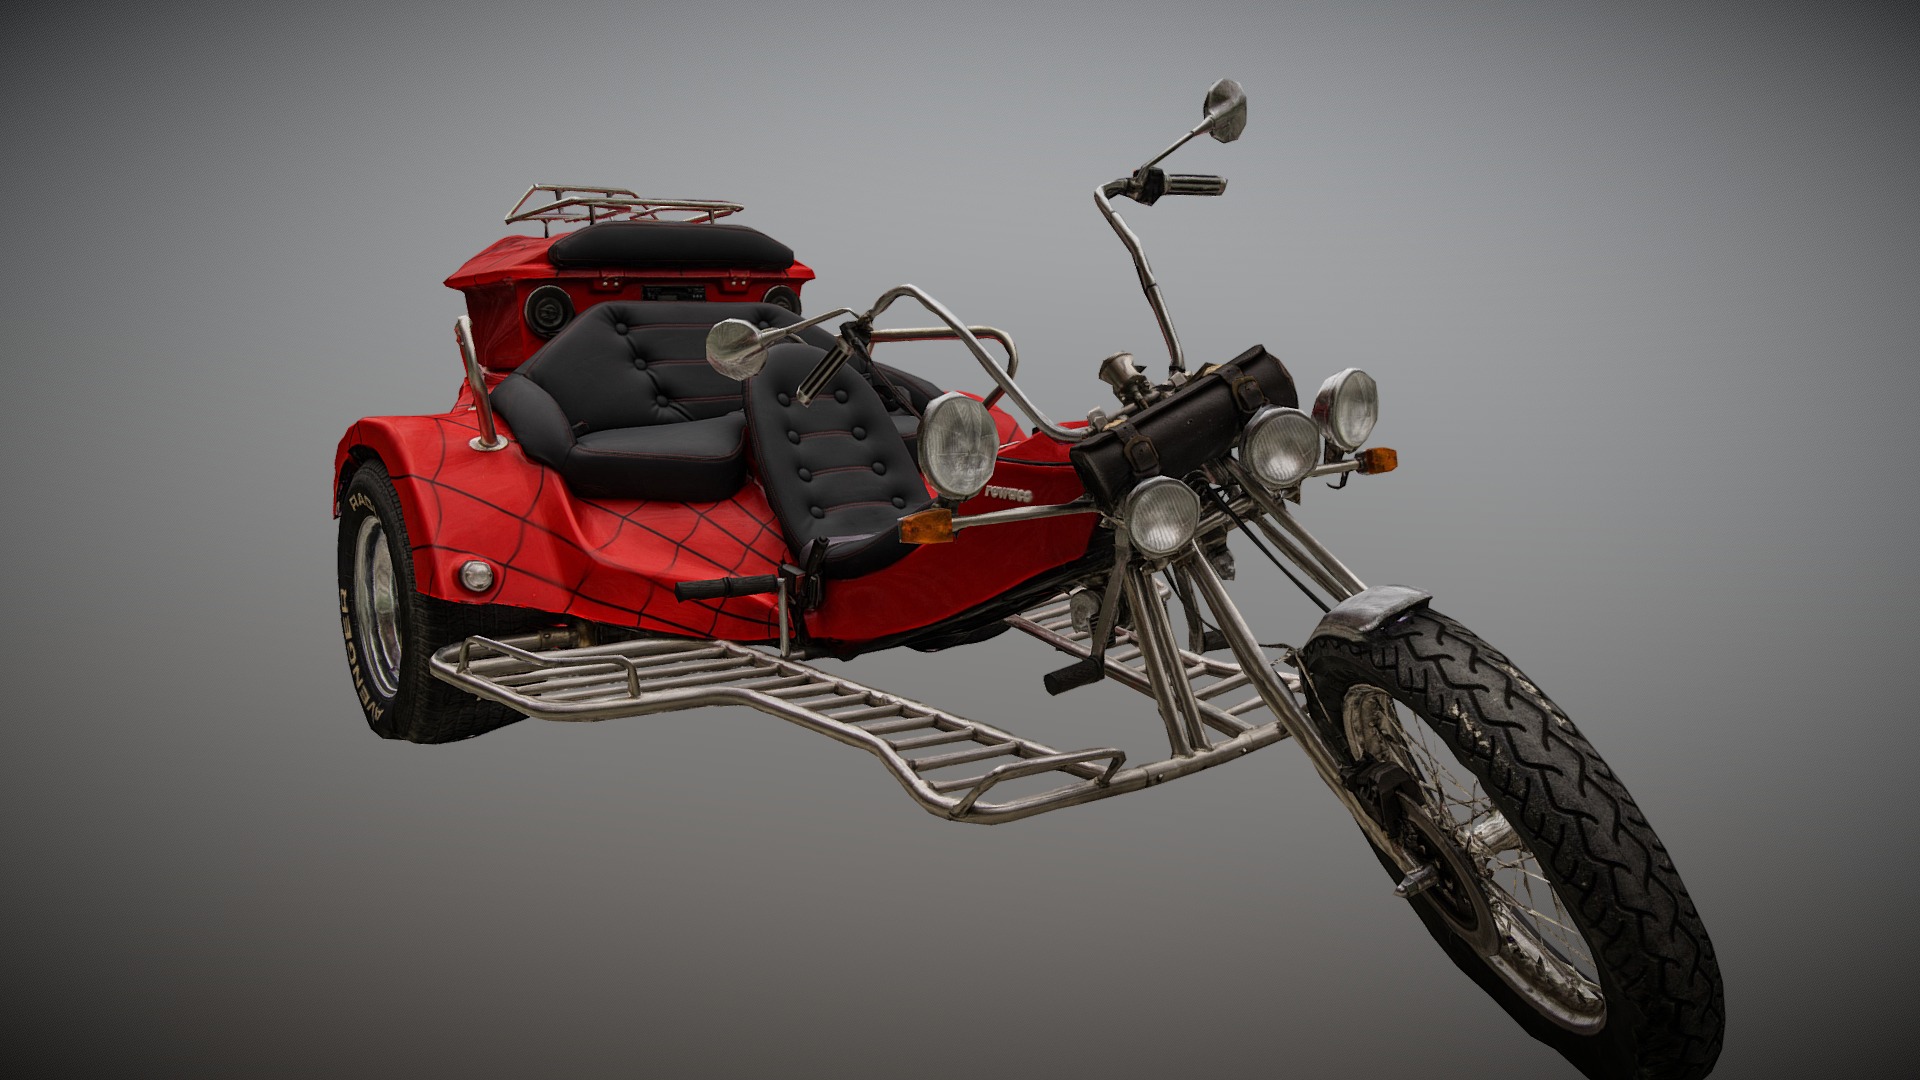 3D model Low poly Rewaco Trike HS5  photogrammetry scan - This is a 3D model of the Low poly Rewaco Trike HS5  photogrammetry scan. The 3D model is about a red motorcycle with a black seat.